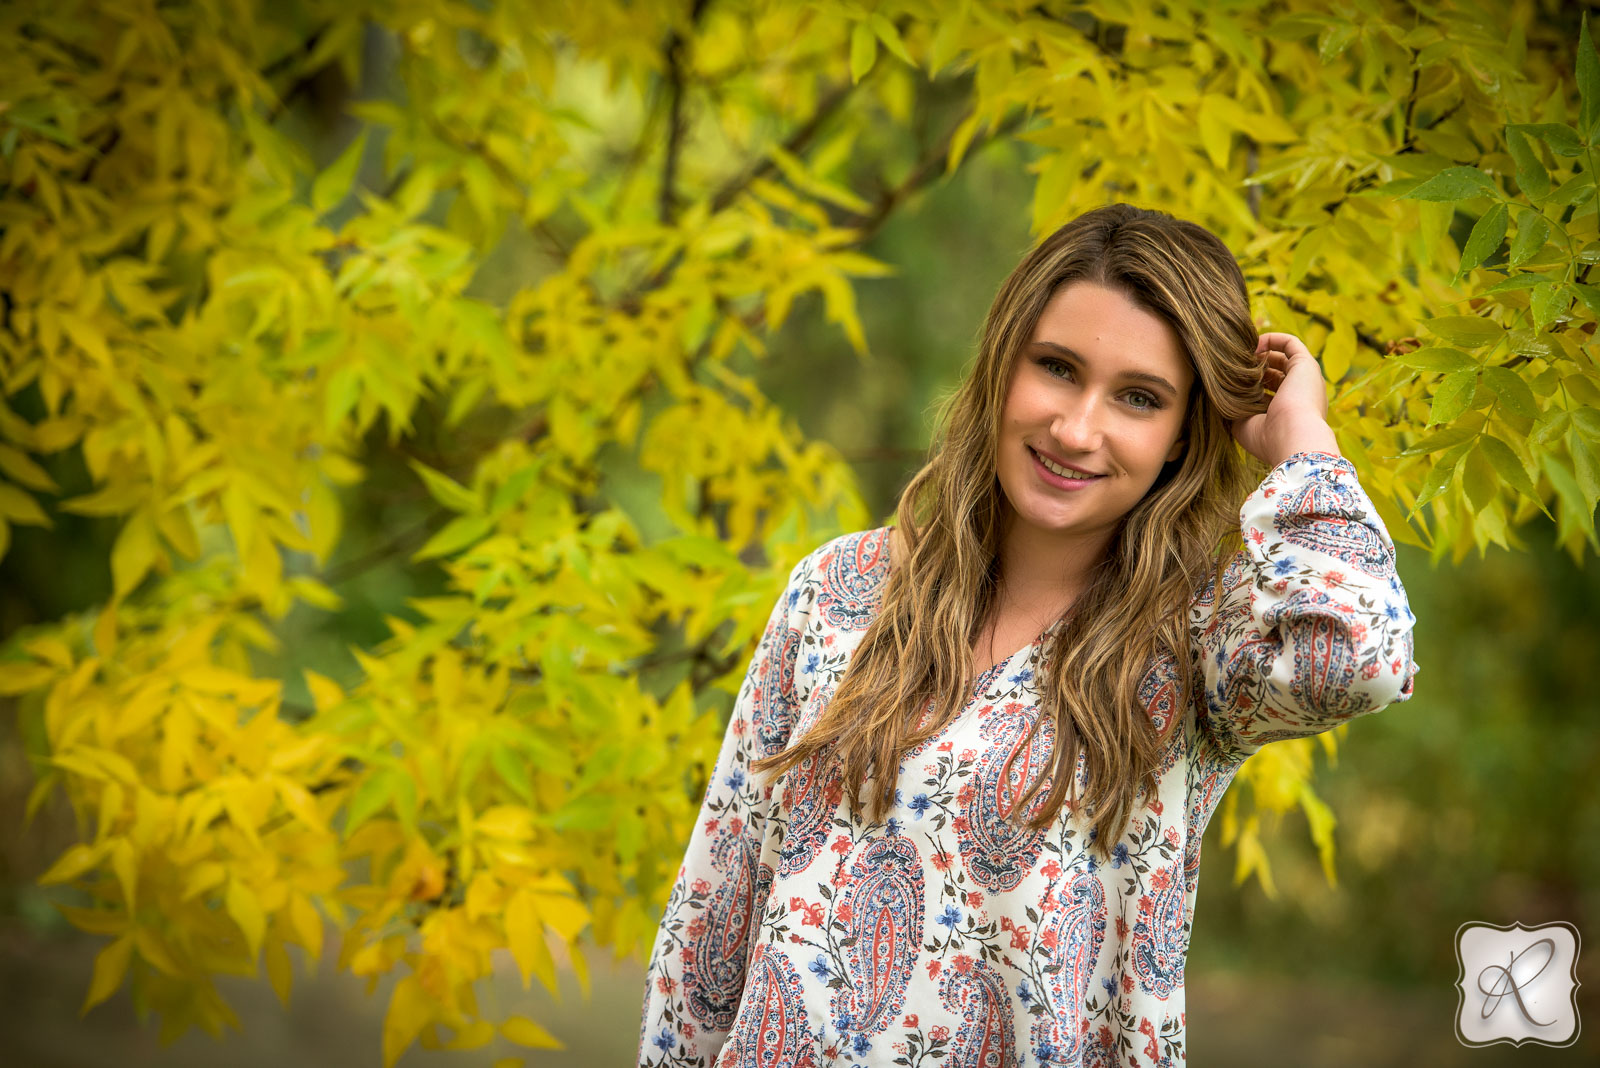 Fall Senior Pictures